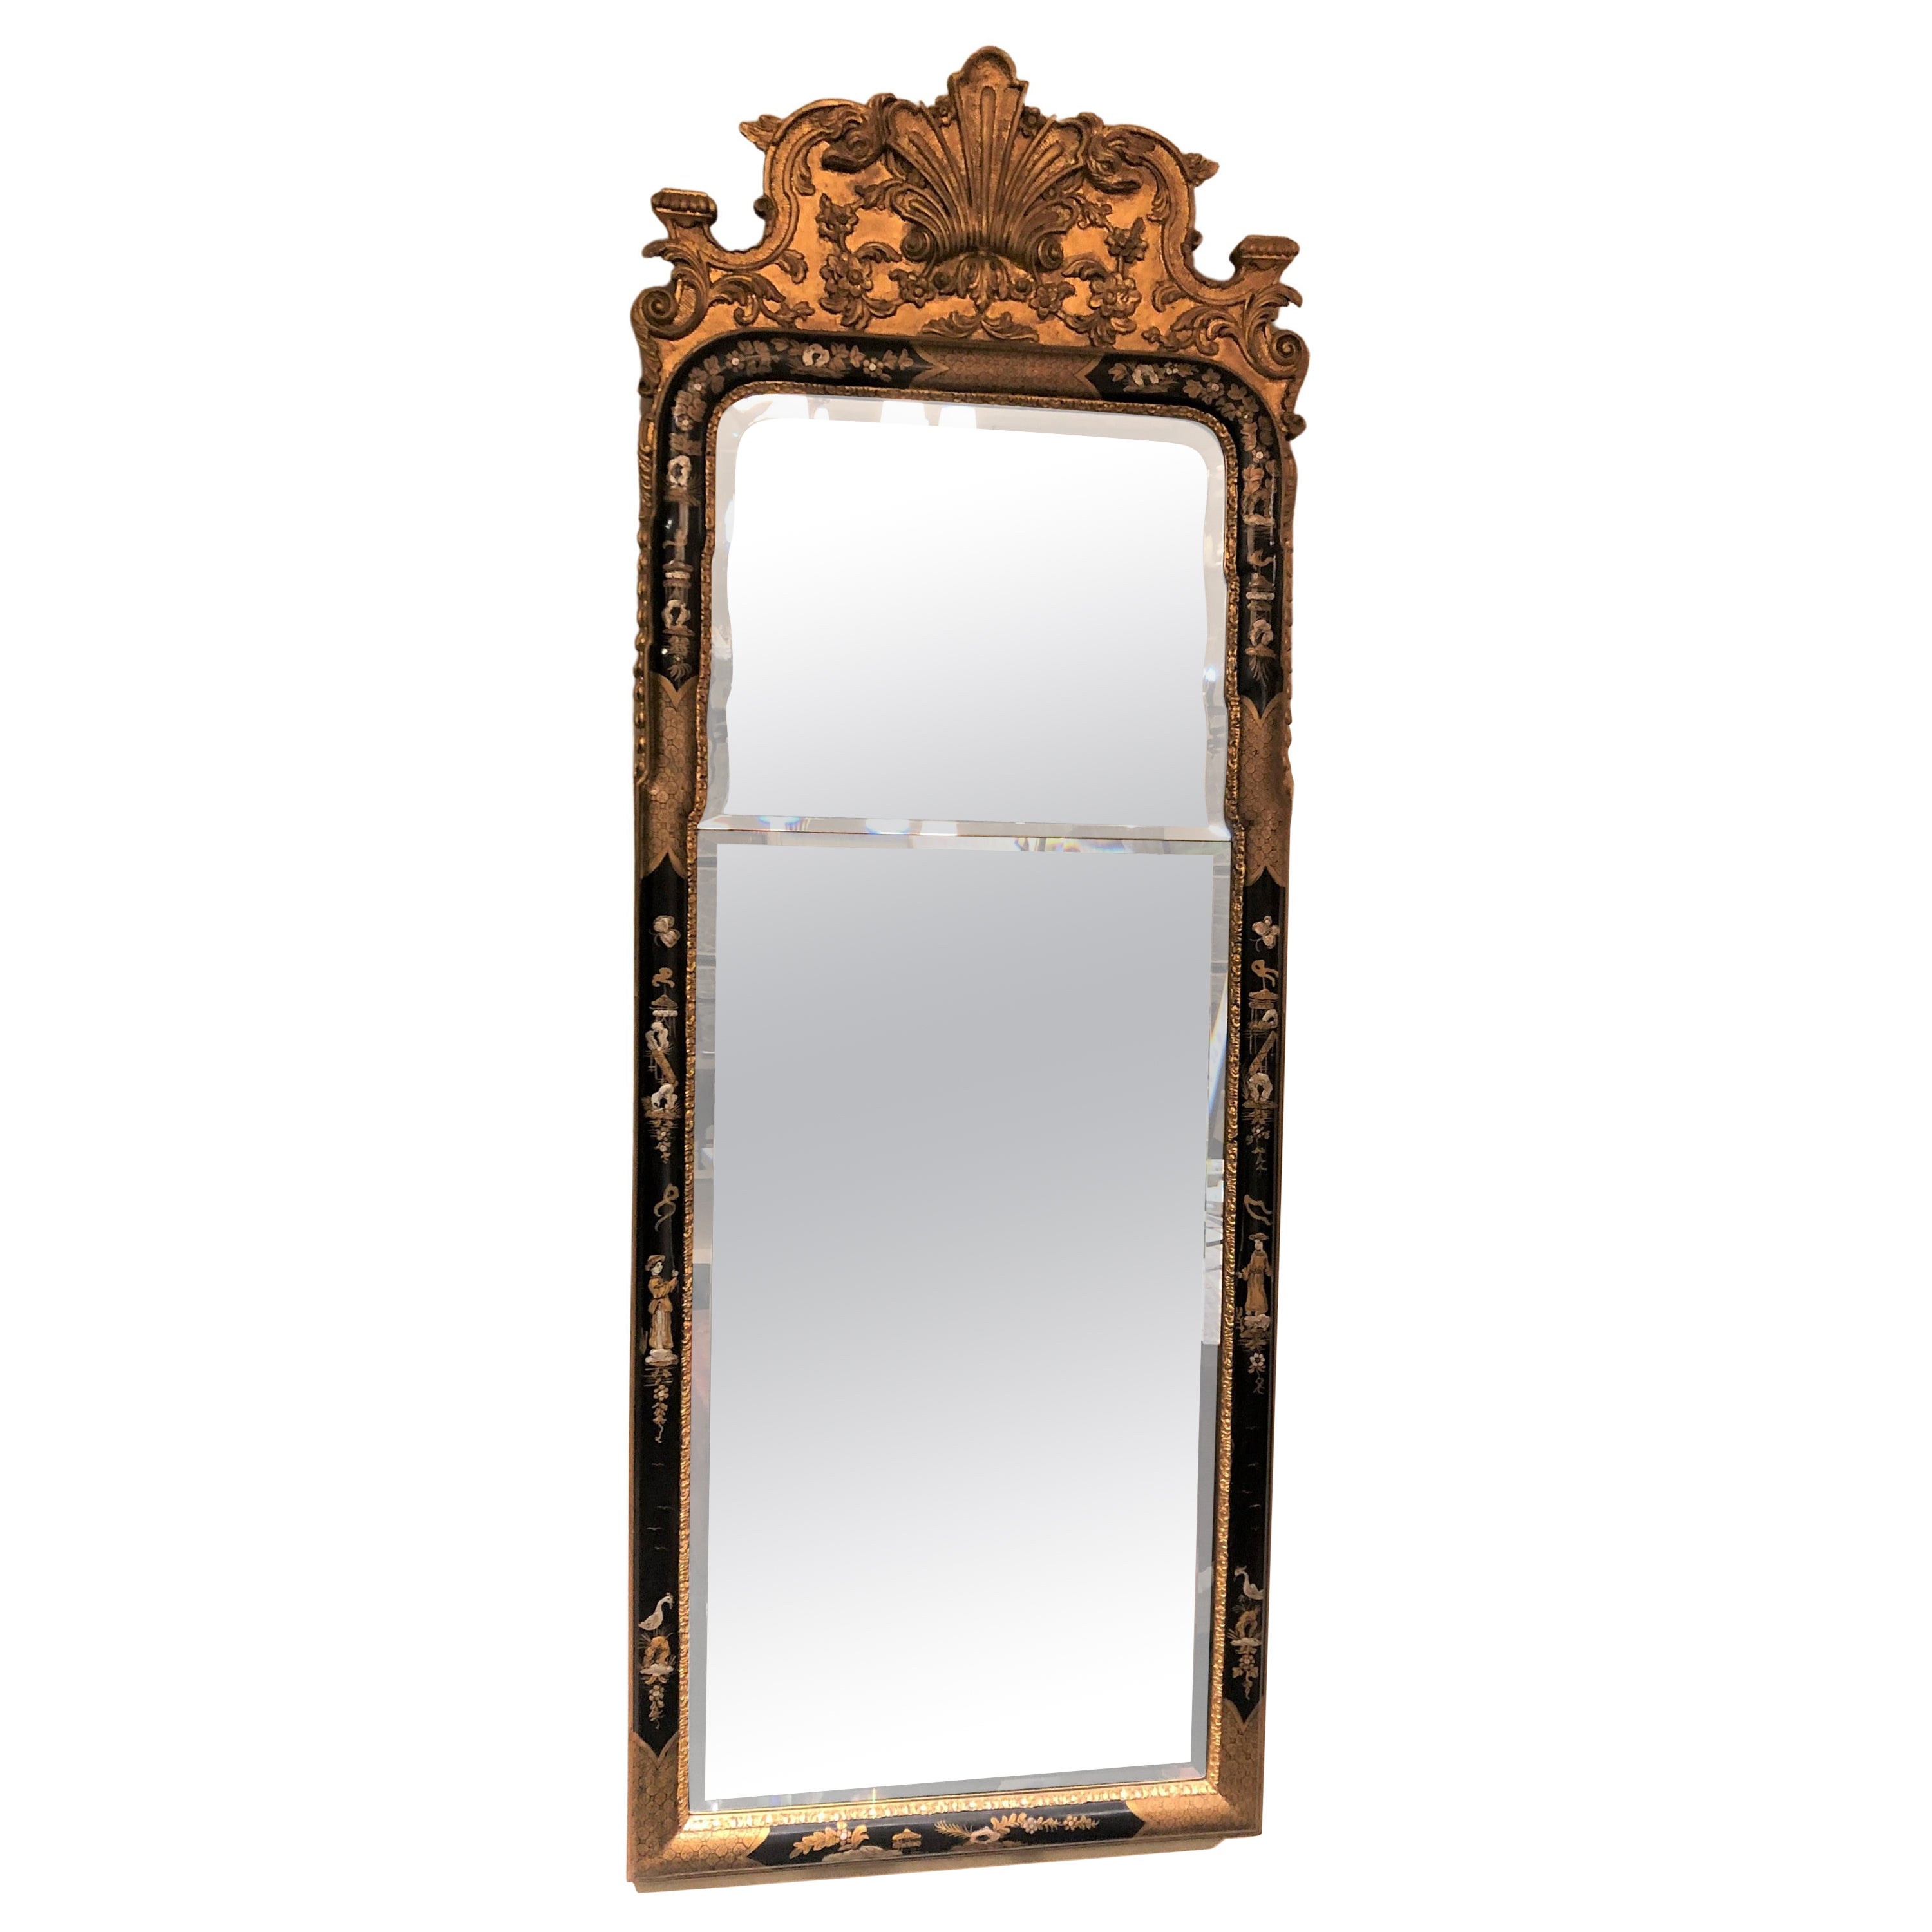 Black Lacquered Queen Anne Style Mirror w/ Chinoiserie Decoration & Bevel Glass